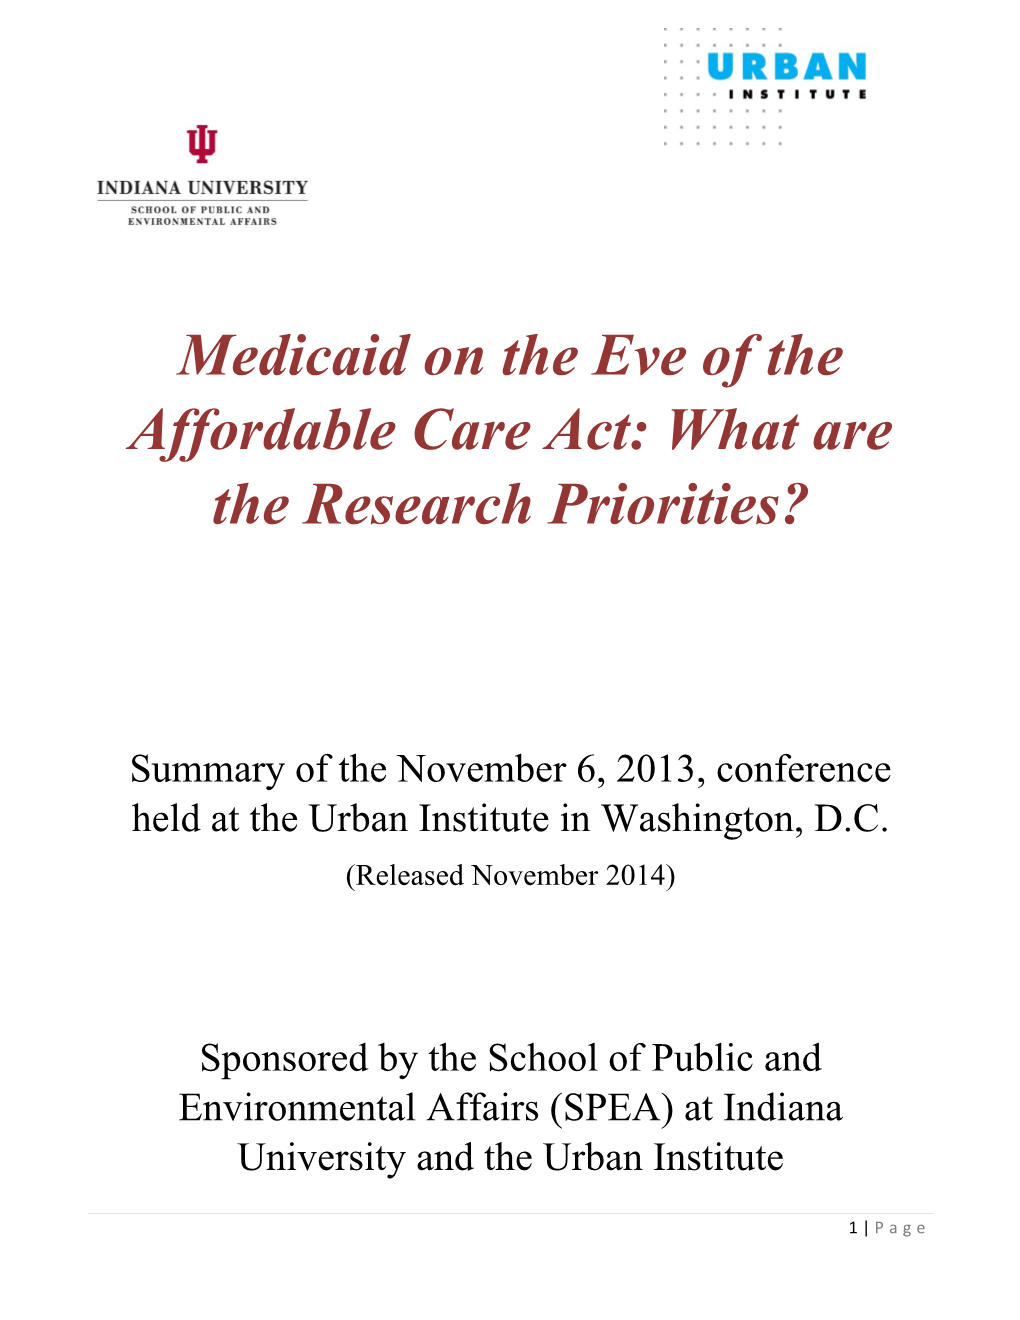 Medicaid on the Eve of the Affordable Care Act: What Are the Research Priorities?